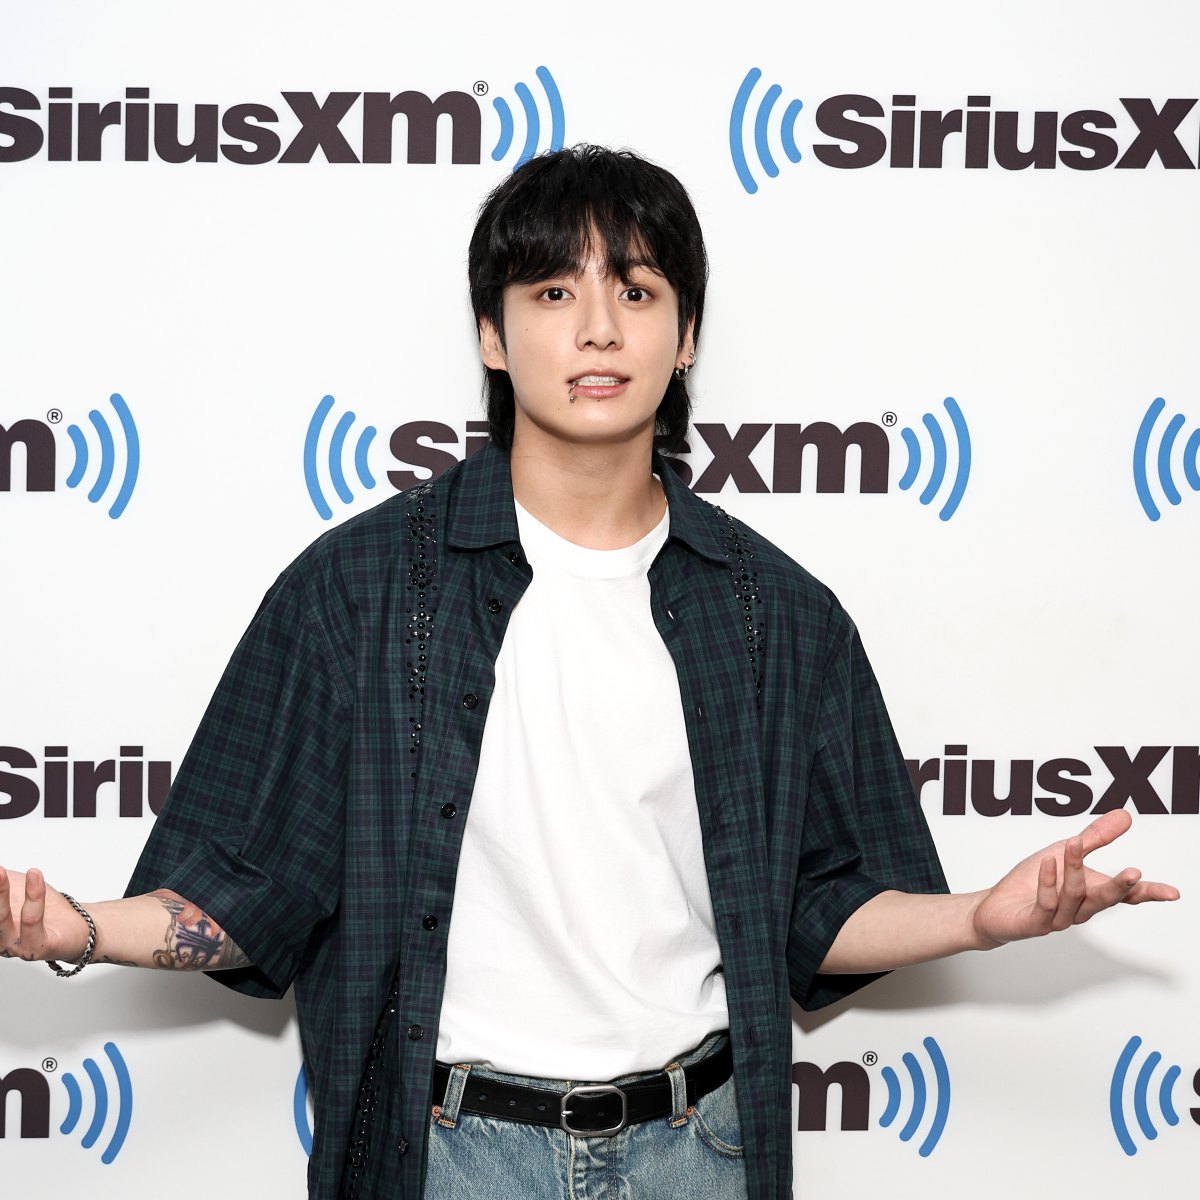 jungkook: Jungkook to drop 1st album by year-end! 'Golden Maknae' confirms  his solo album is on the way - The Economic Times